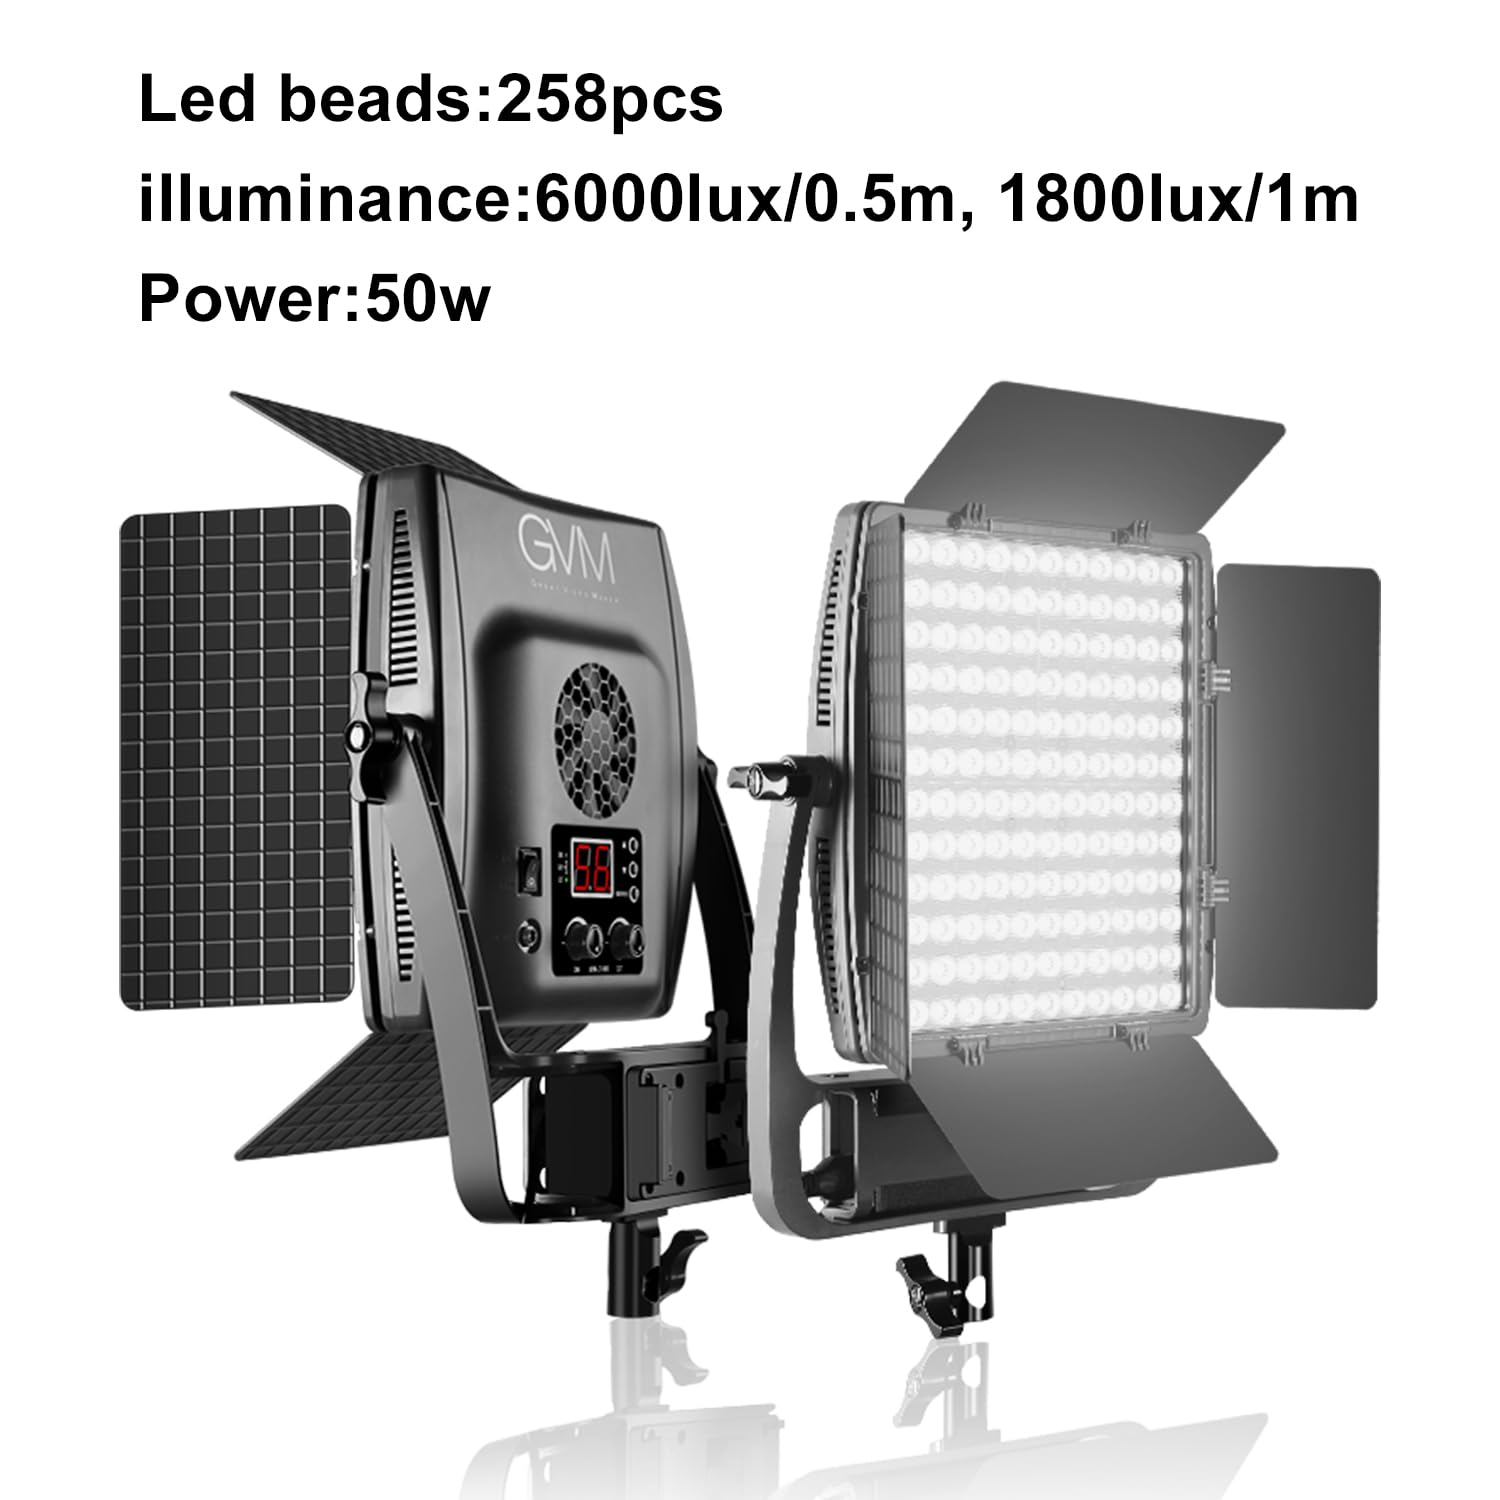 GVM 900D LED Video Light，Dimmable Bi-Color and Stand video Lighting Kit, APP Intelligent Control System， CRI97，3200-5600K fo YouTube Studio Photography， Outdoor Video Shooting Lighting (2 Packs)